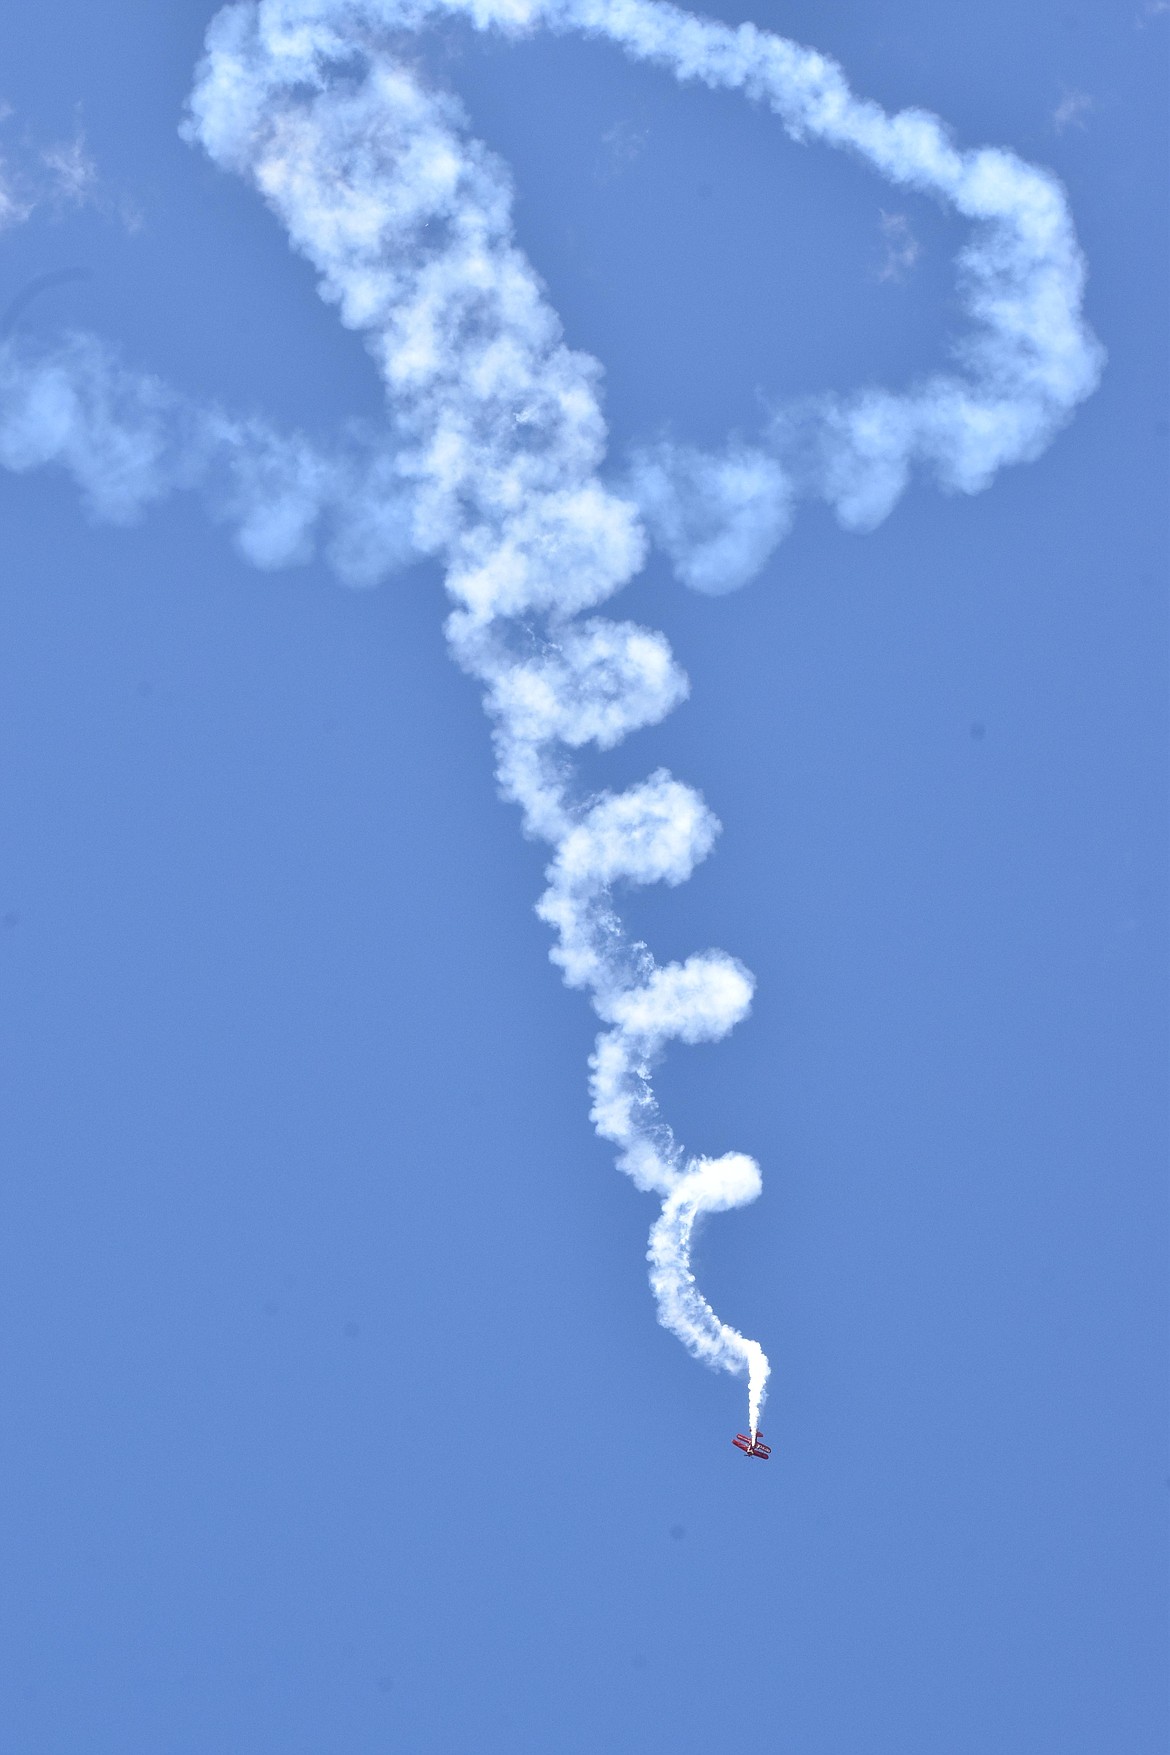 Acrobatics are, and will continue to be, a big part of the Moses Lake Airshow. An exhibitor from 2023 is pictured.